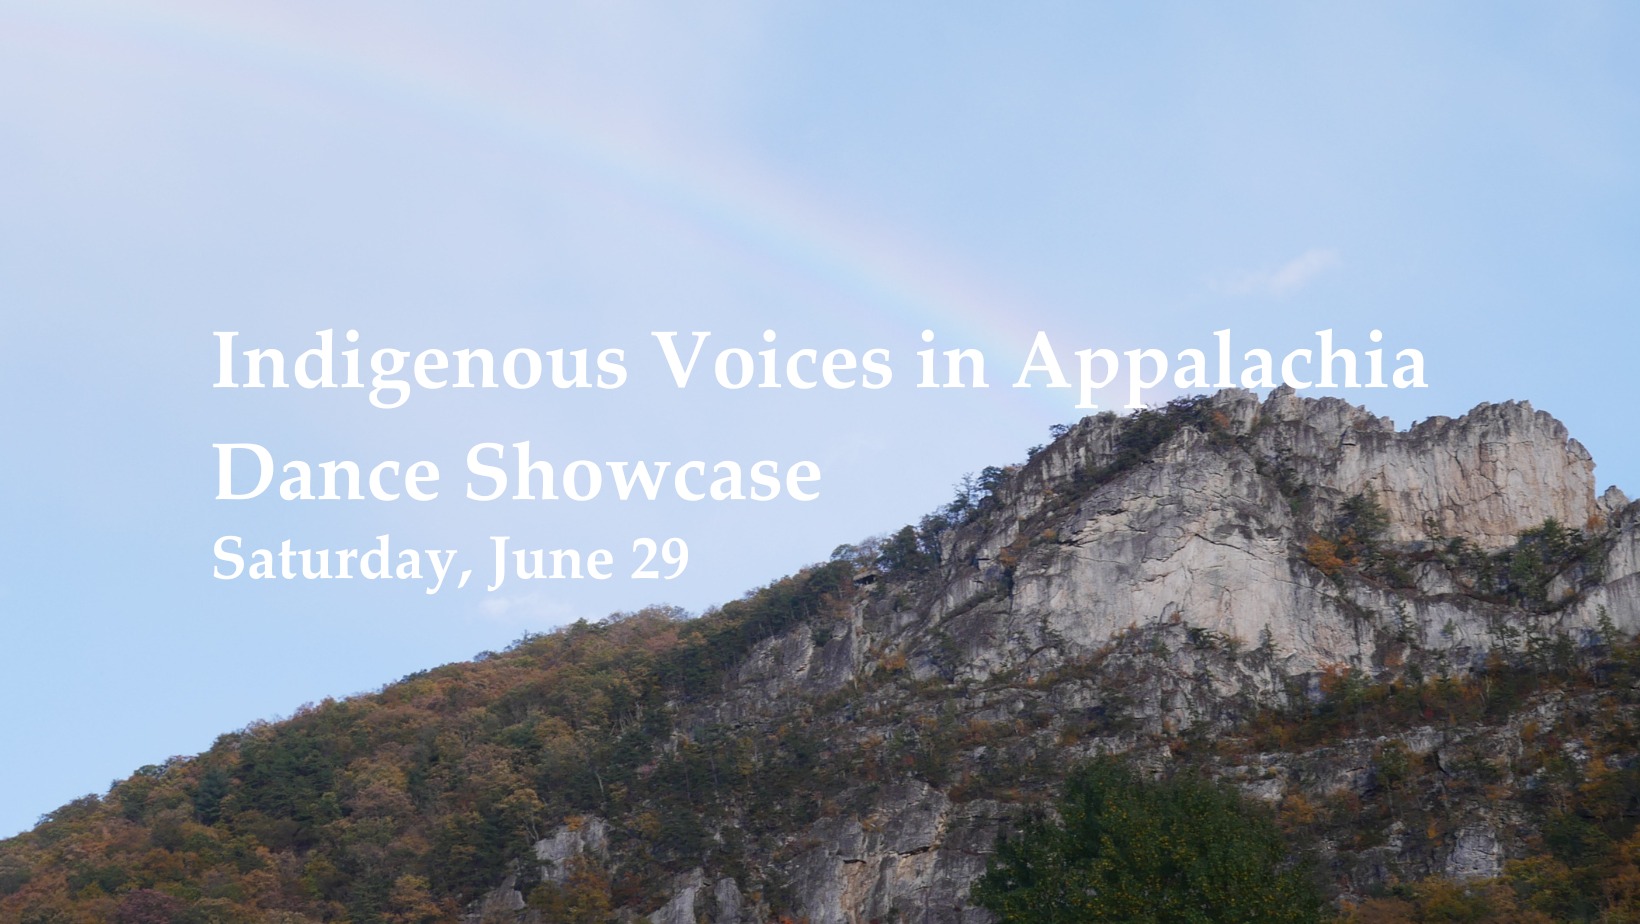 Indigenous Voices in Appalachia Dance Showcase